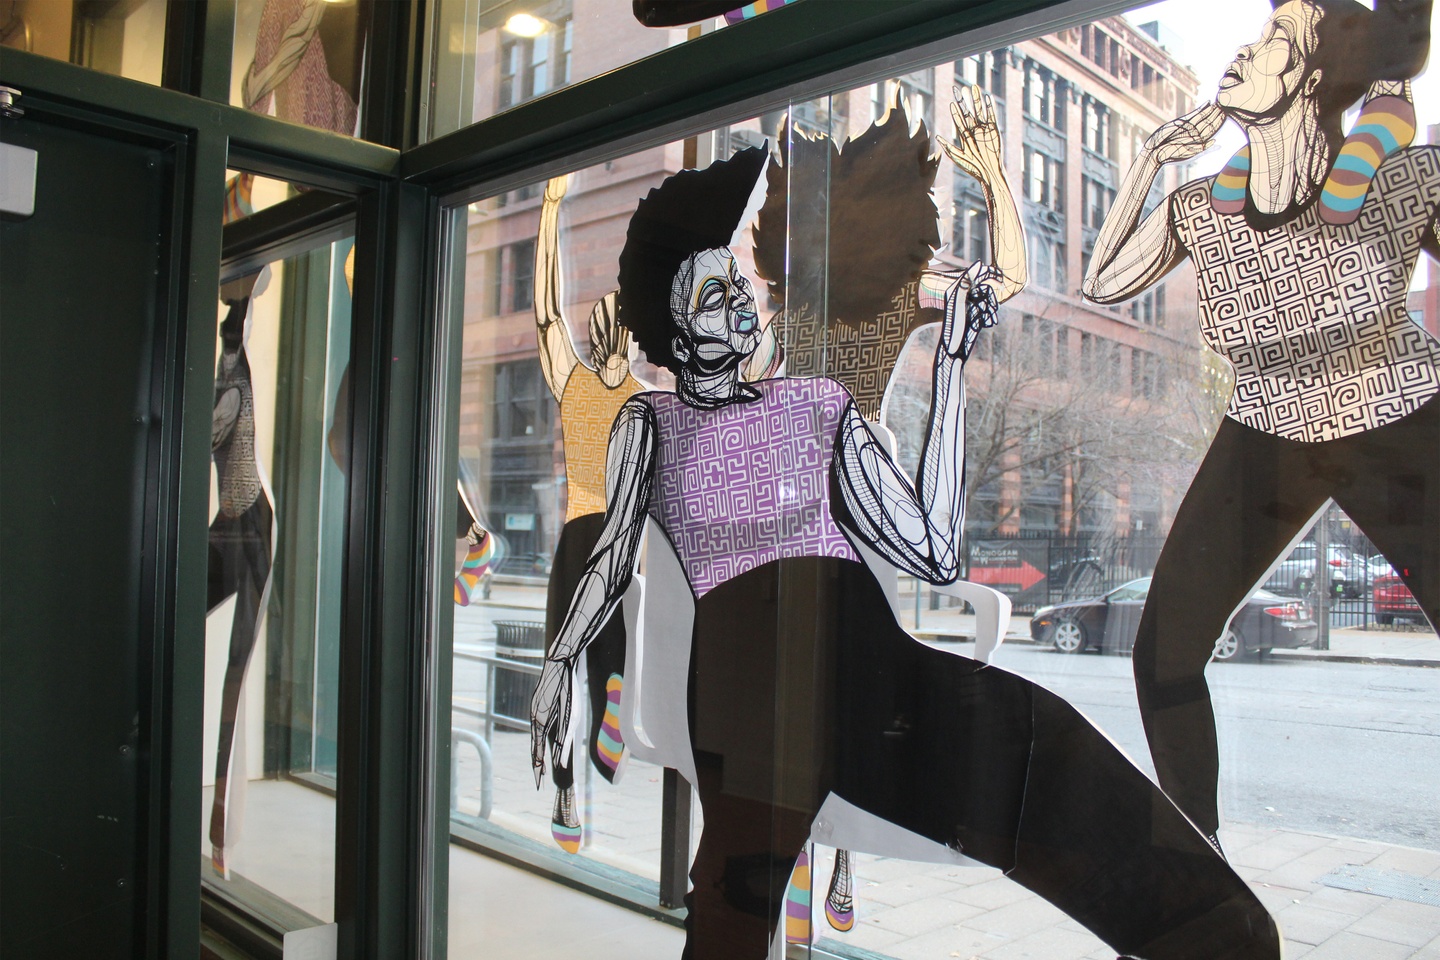 Large-scale paper cutouts of people in a window box with different patterns on their clothing, who appear to be dancing.